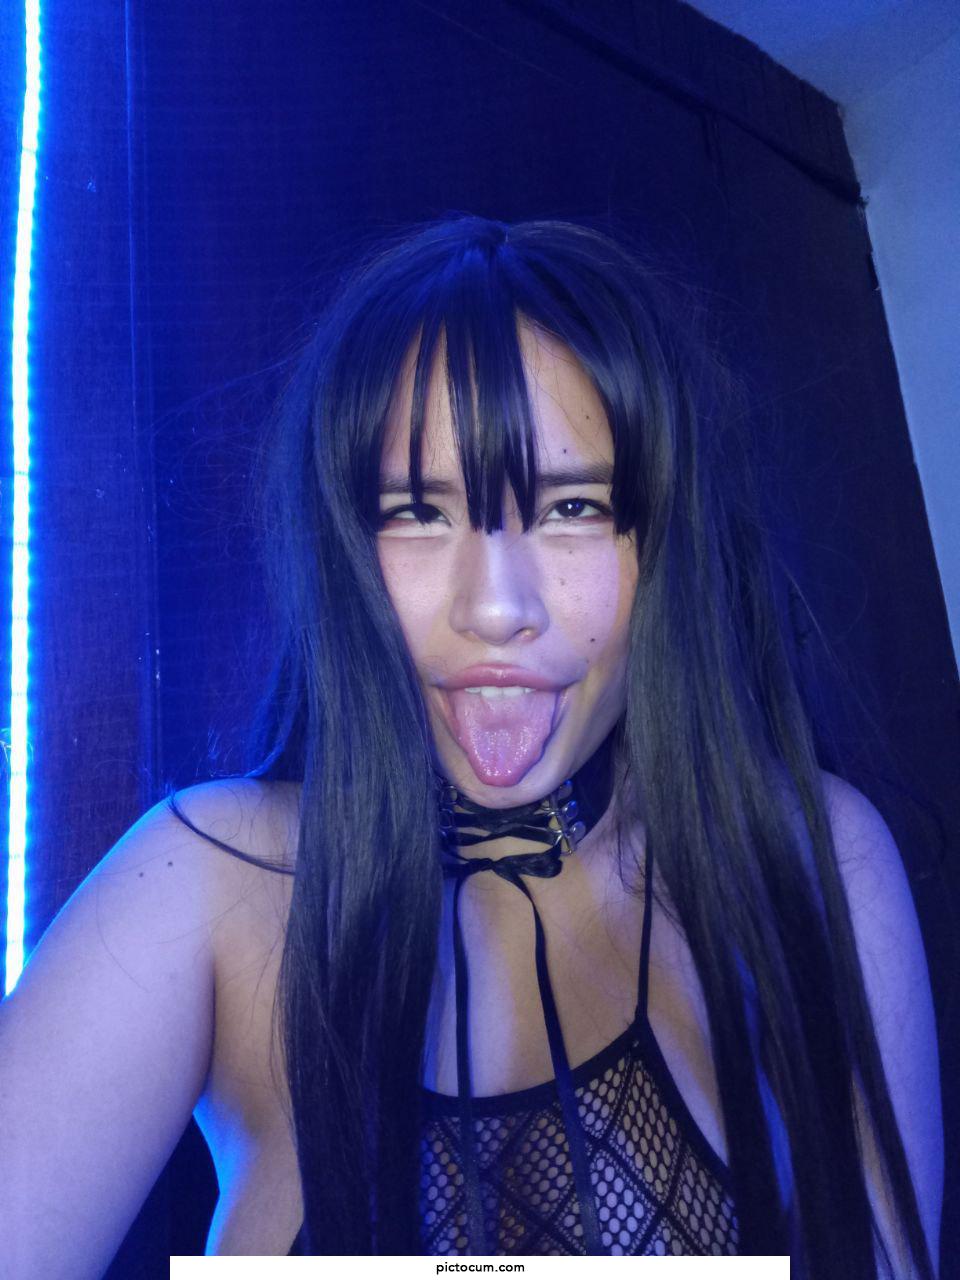 Could you cum I my tongue 👅